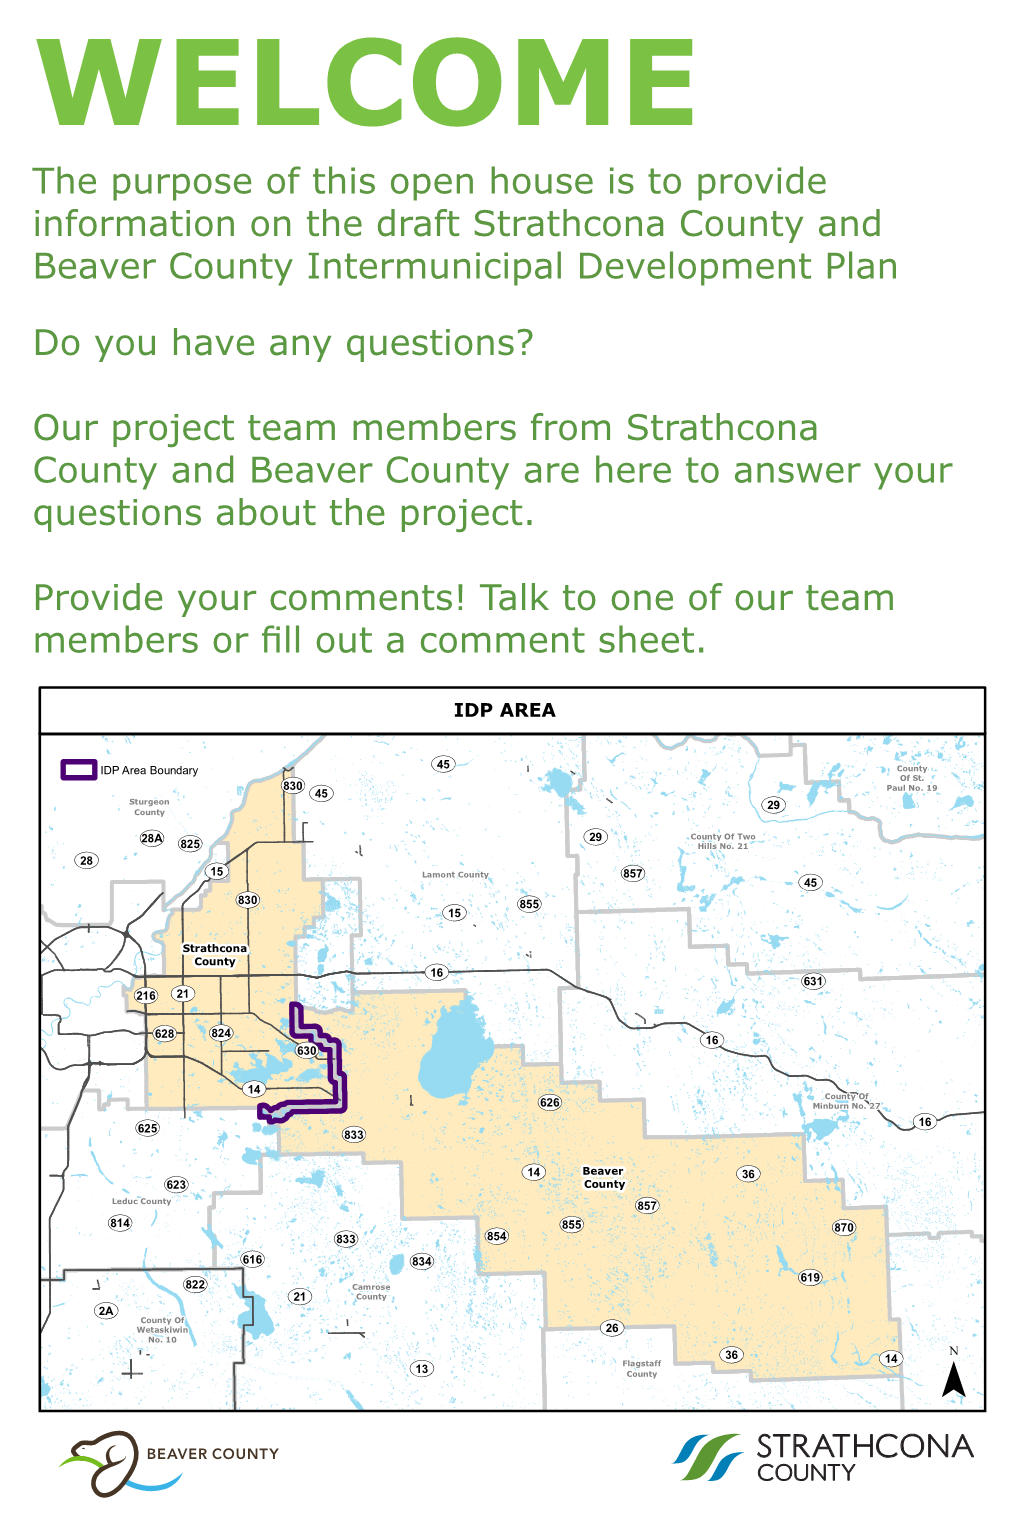 The Purpose of This Open House Is to Provide Information on the Draft Strathcona County and Beaver County Intermunicipal Development Plan